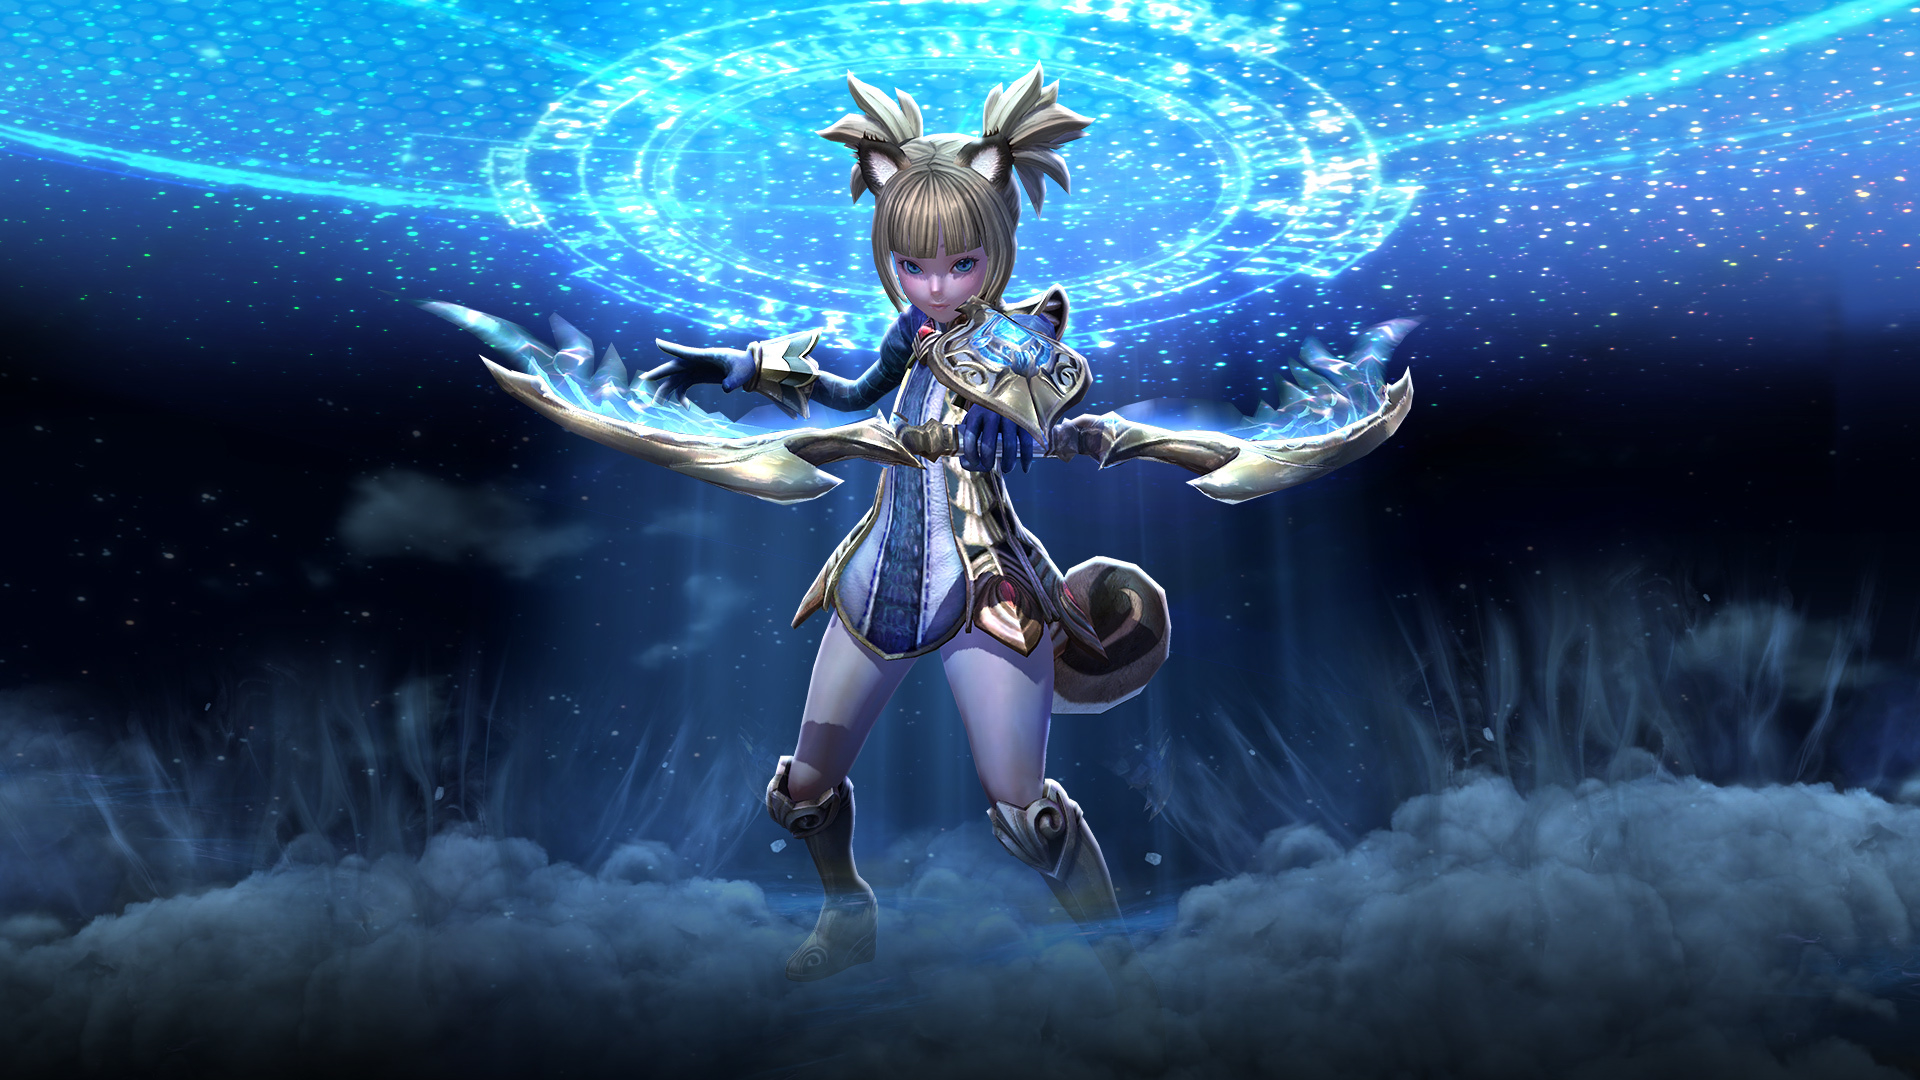 1920x1080 Download wallpaper bow, tera, Elin, section games in resoluti